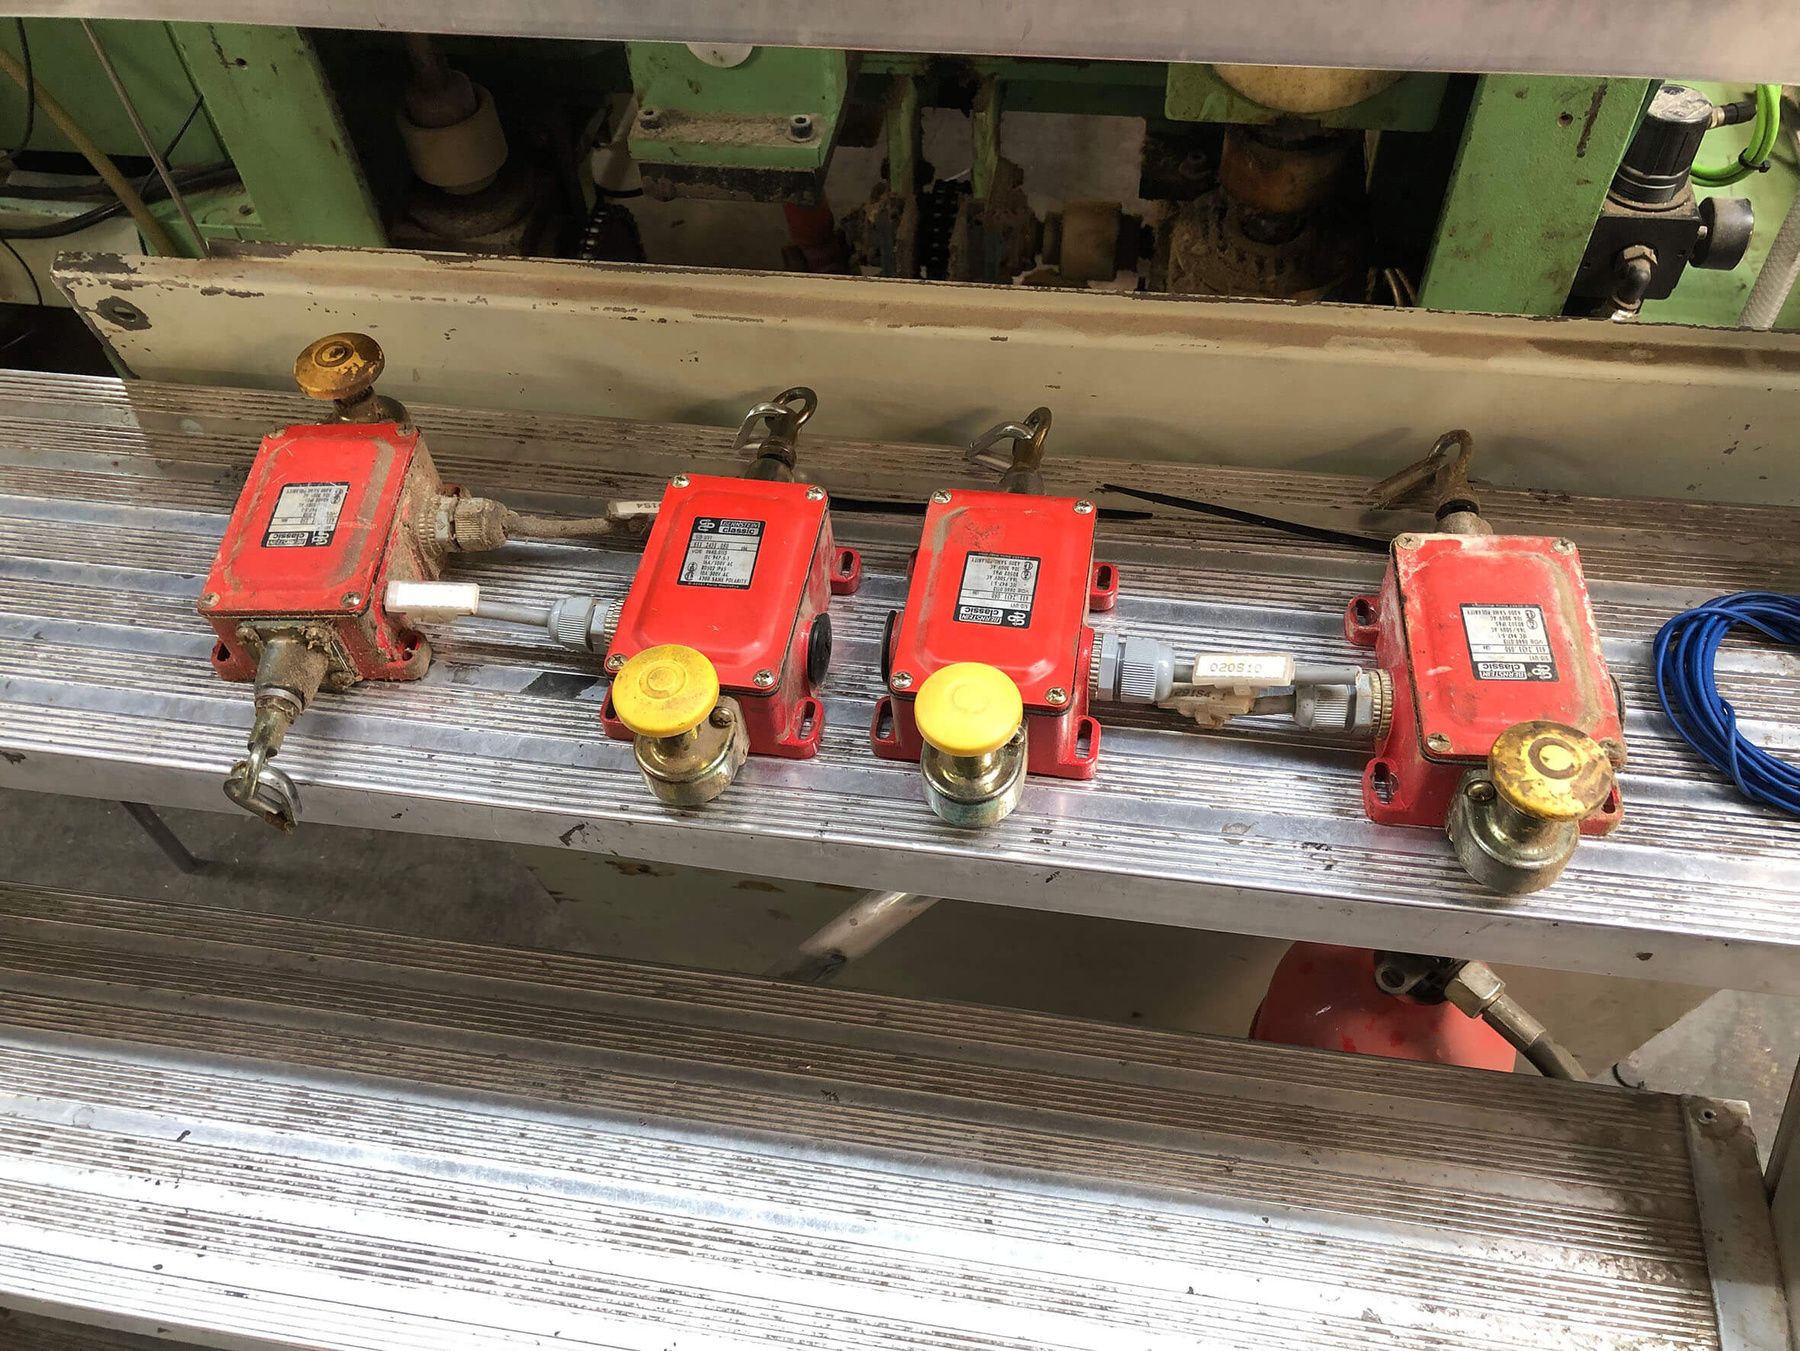 Older models of rope pull switches from BERNSTEIN